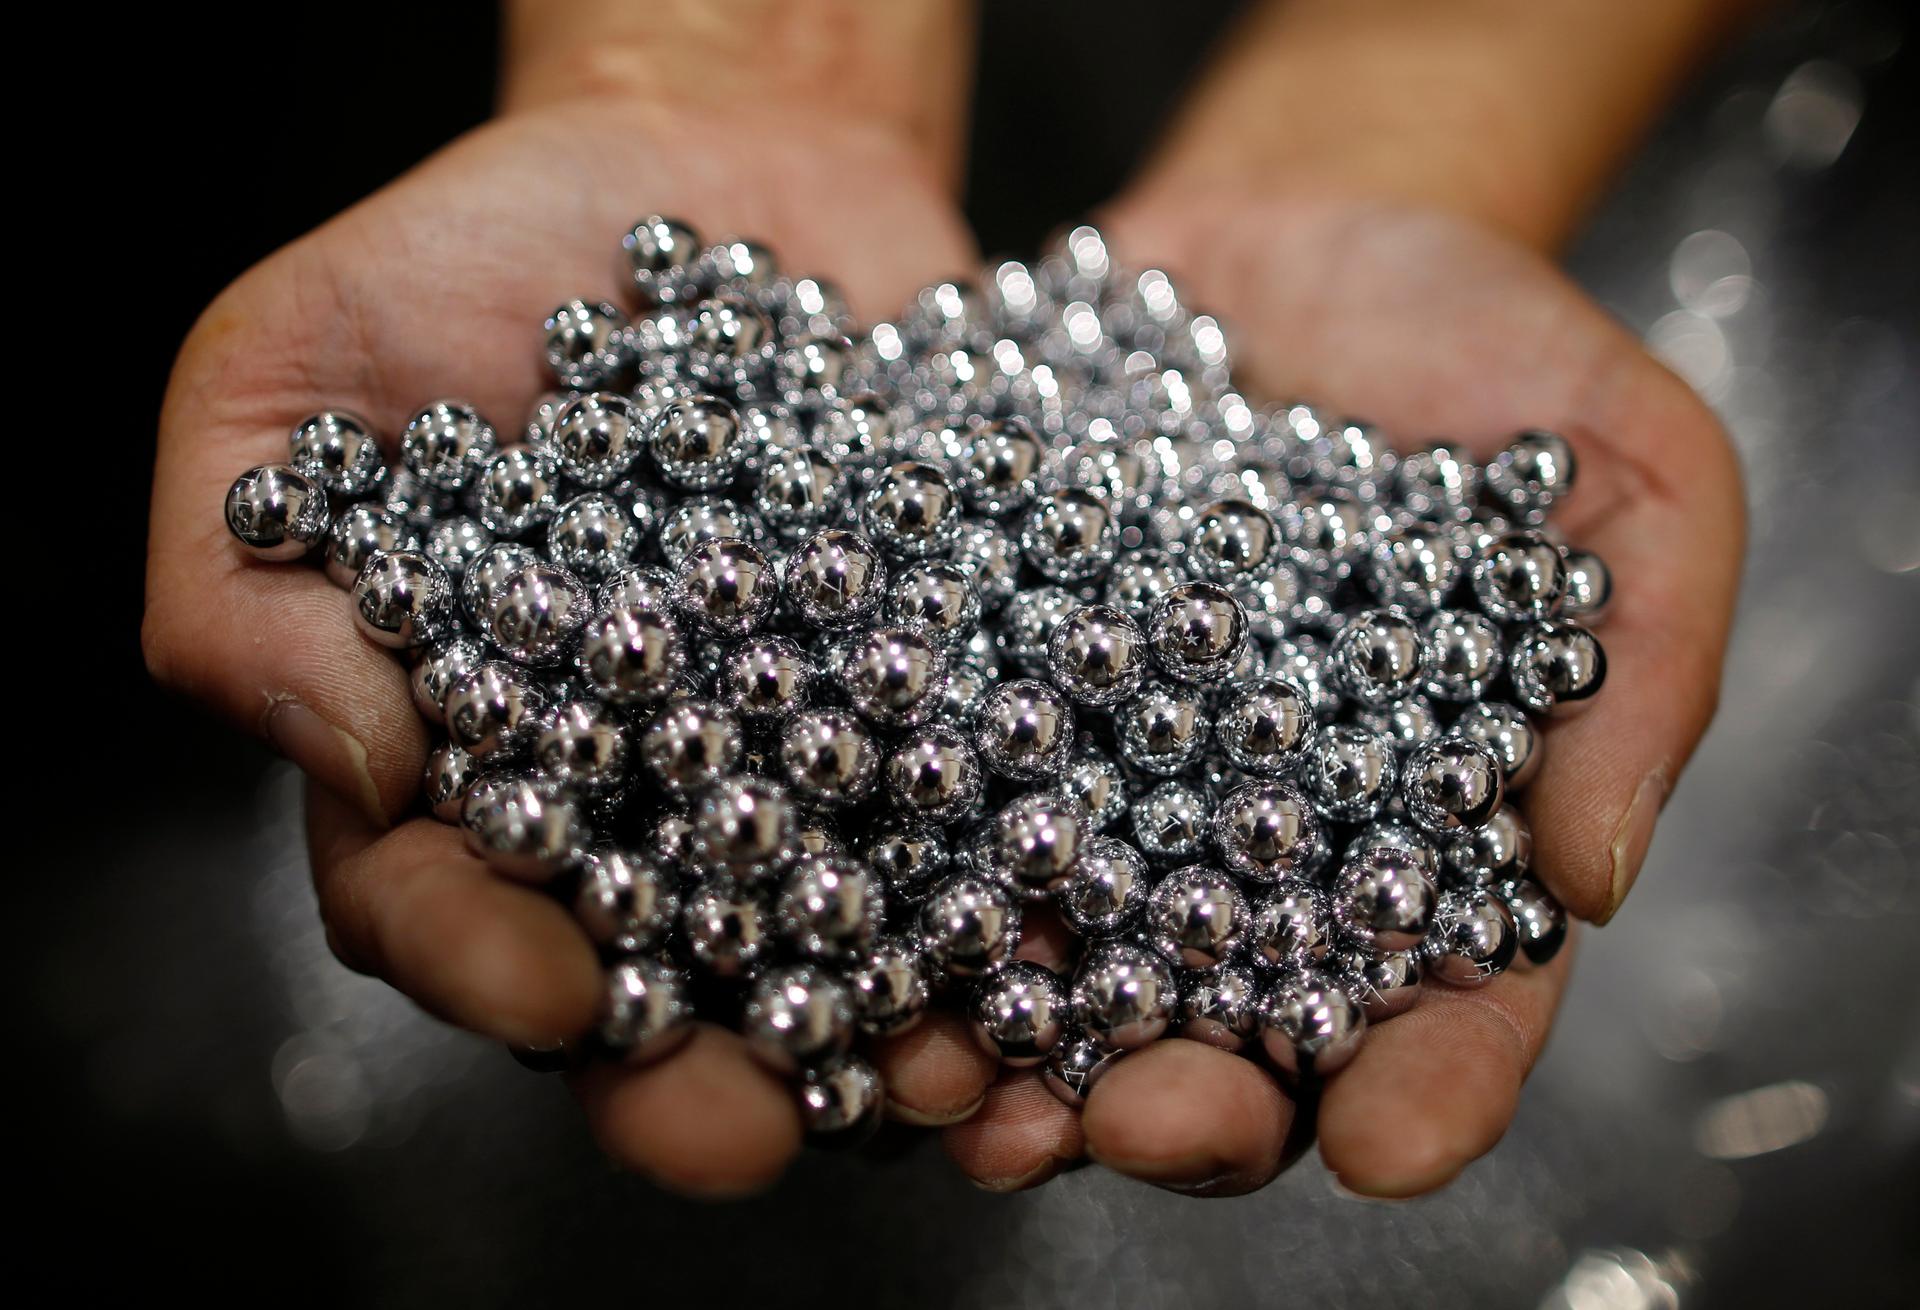 A worker holds silver pachinko balls at a pachinko parlour in Fukaya, north of Tokyo, July 15, 2014.